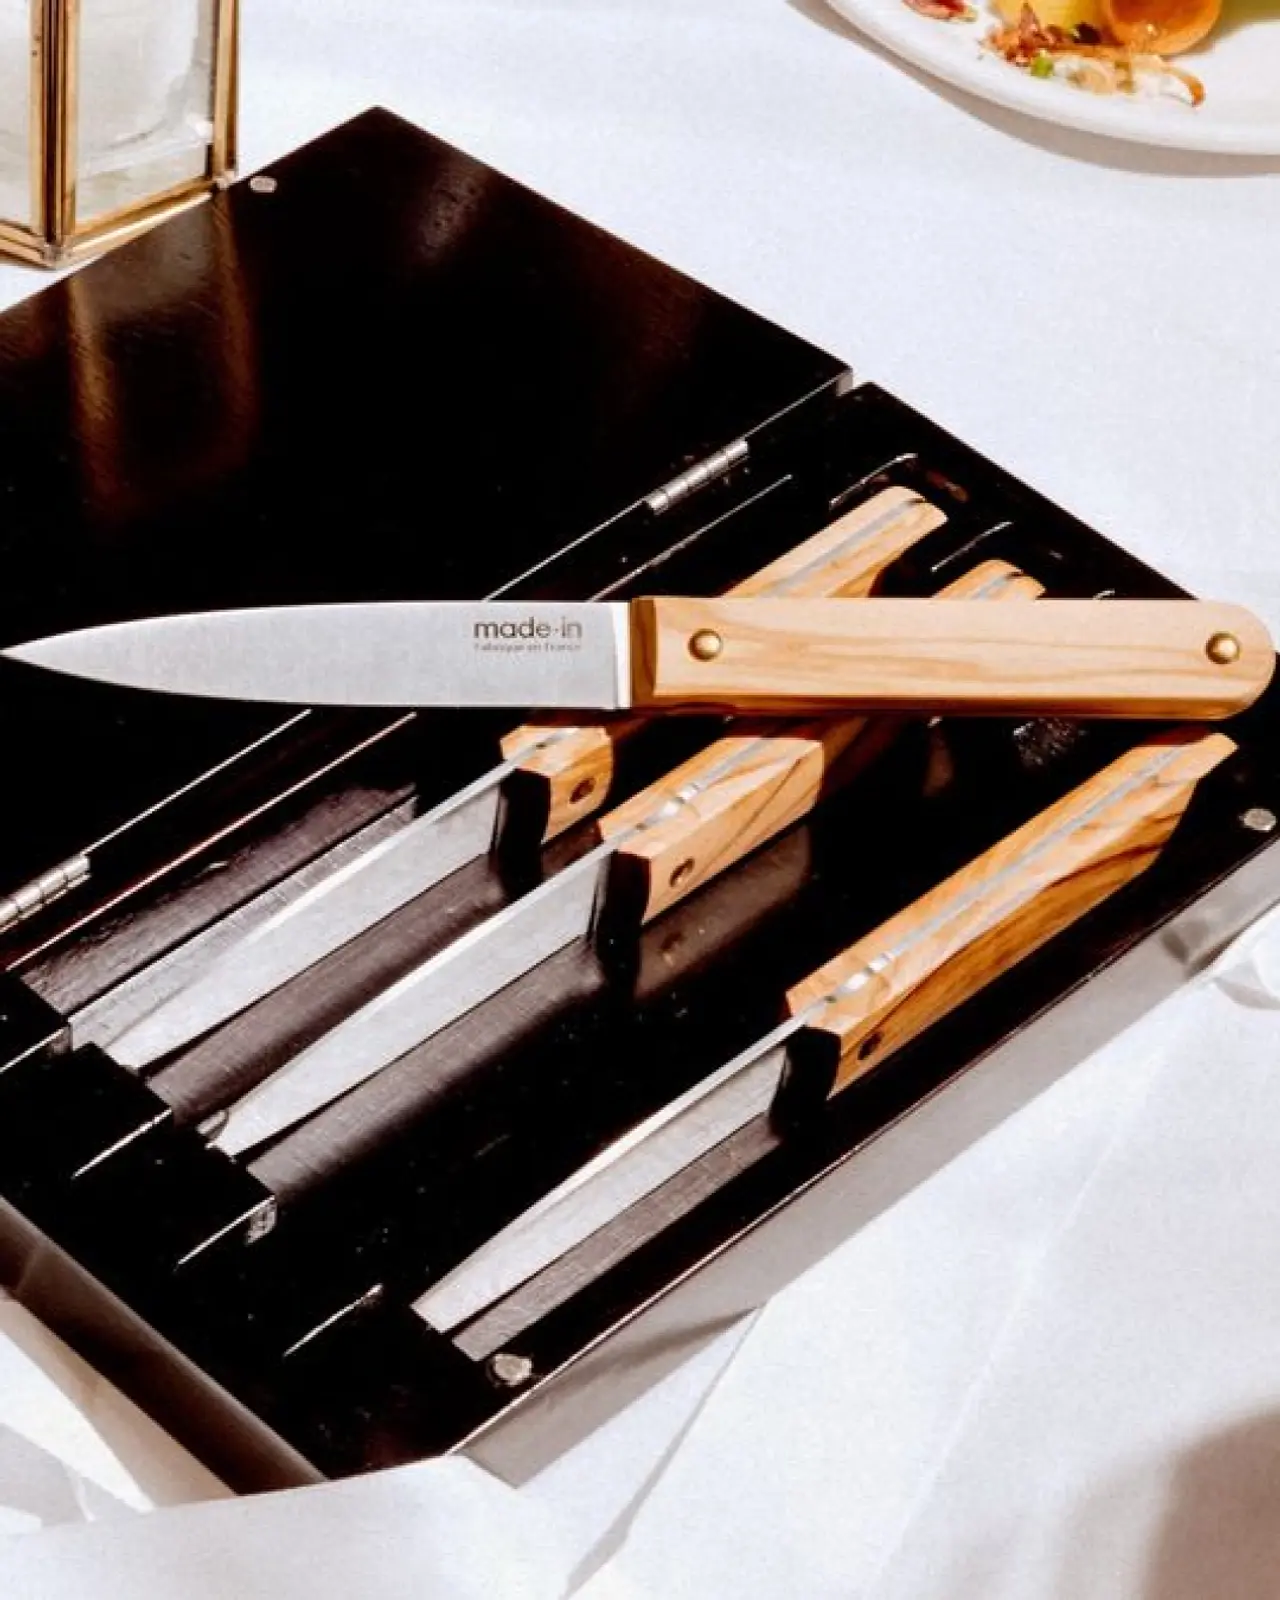 A knife block on a table contains several knives with wooden handles and one knife resting on top, partially inserted into a slot.